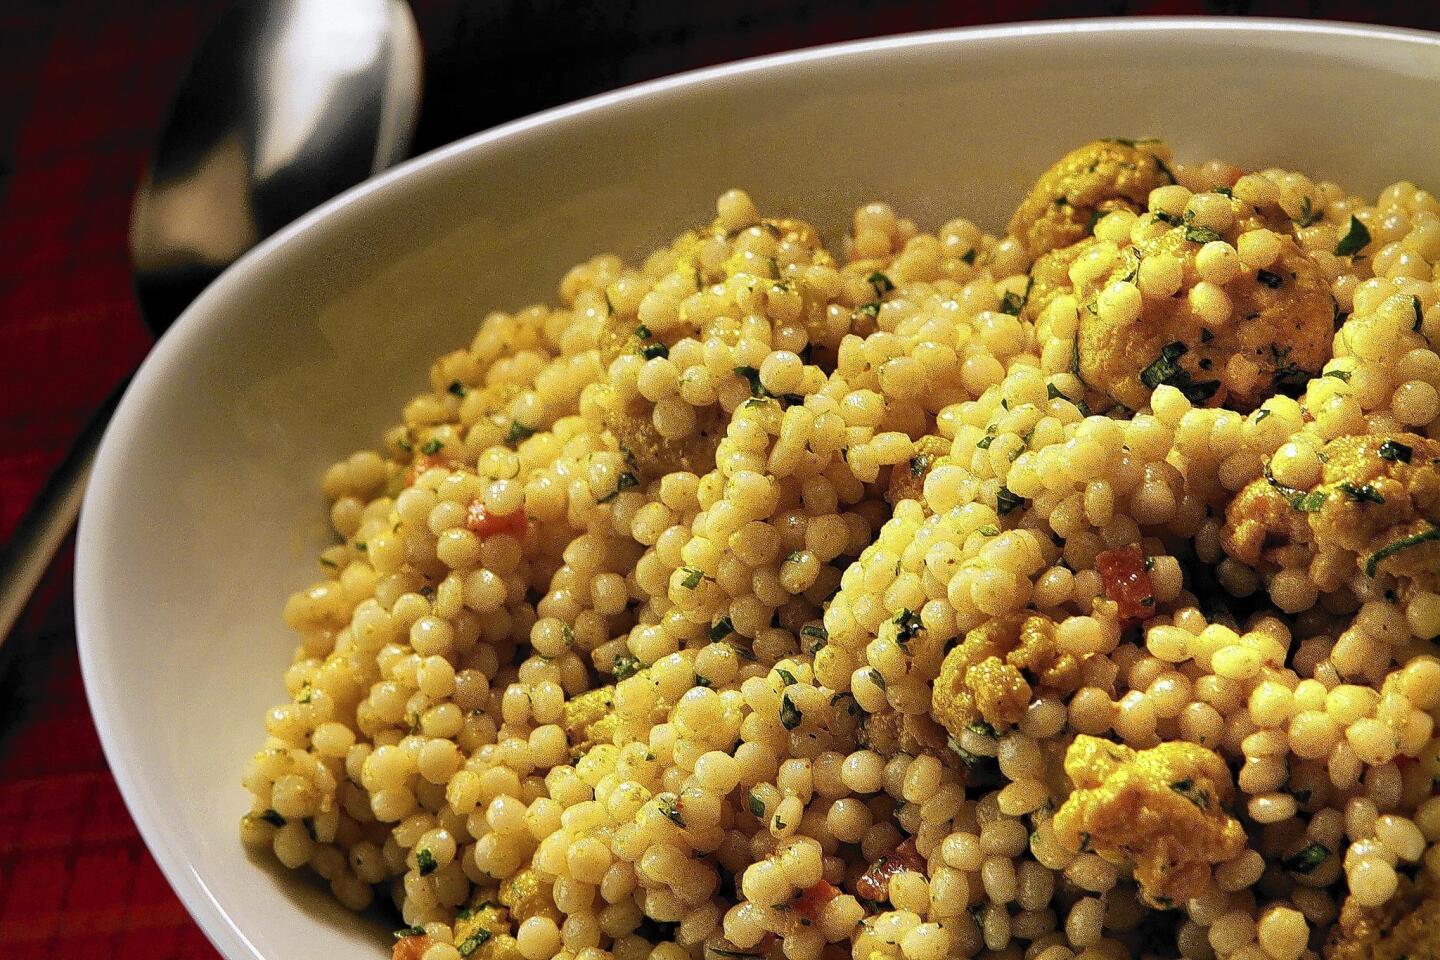 Mendocino Farms' curried couscous